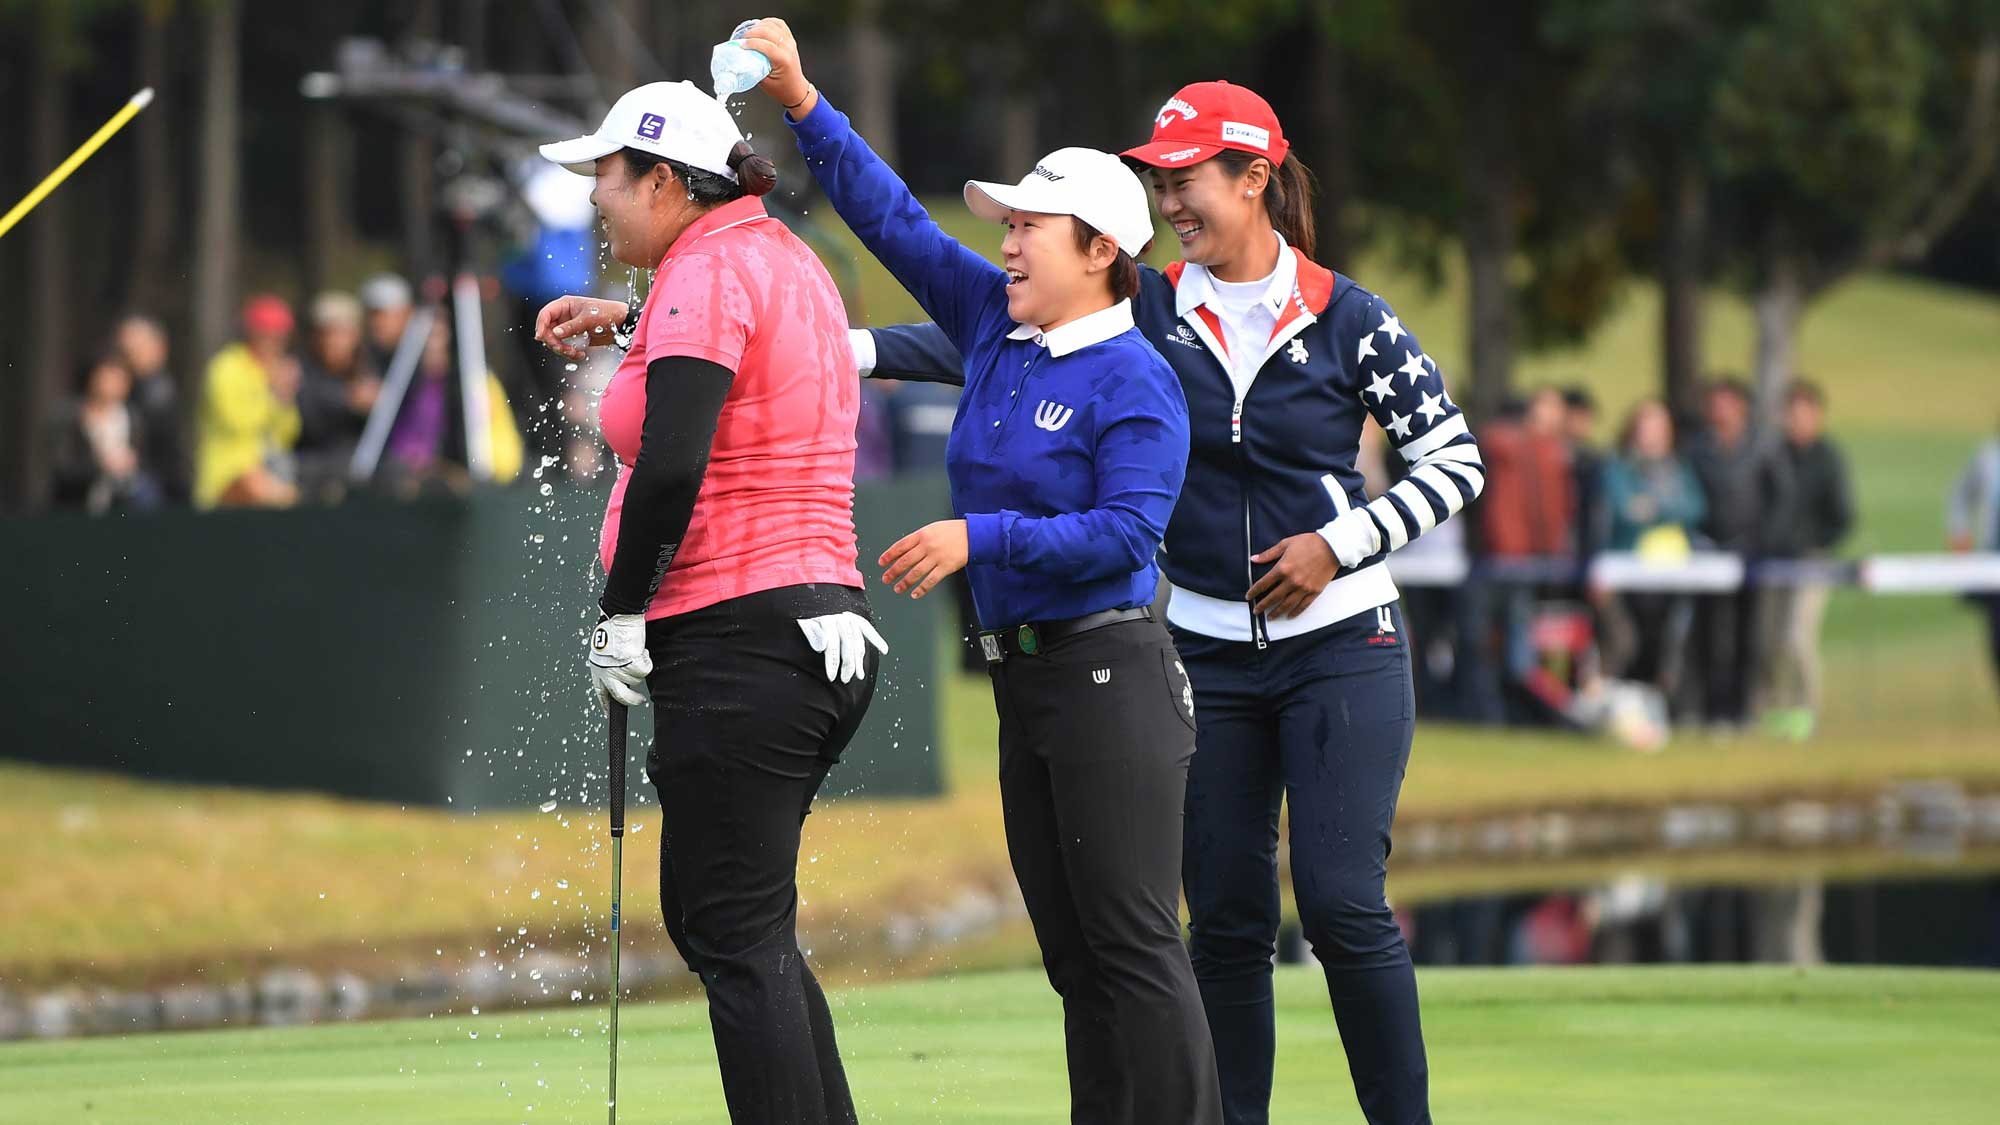 Shanshan Feng of China gets water dumped on her head by Jiyai Shin of South Korea and Xi Yu Lin of China in celebration after Feng won the TOTO Japan Classic